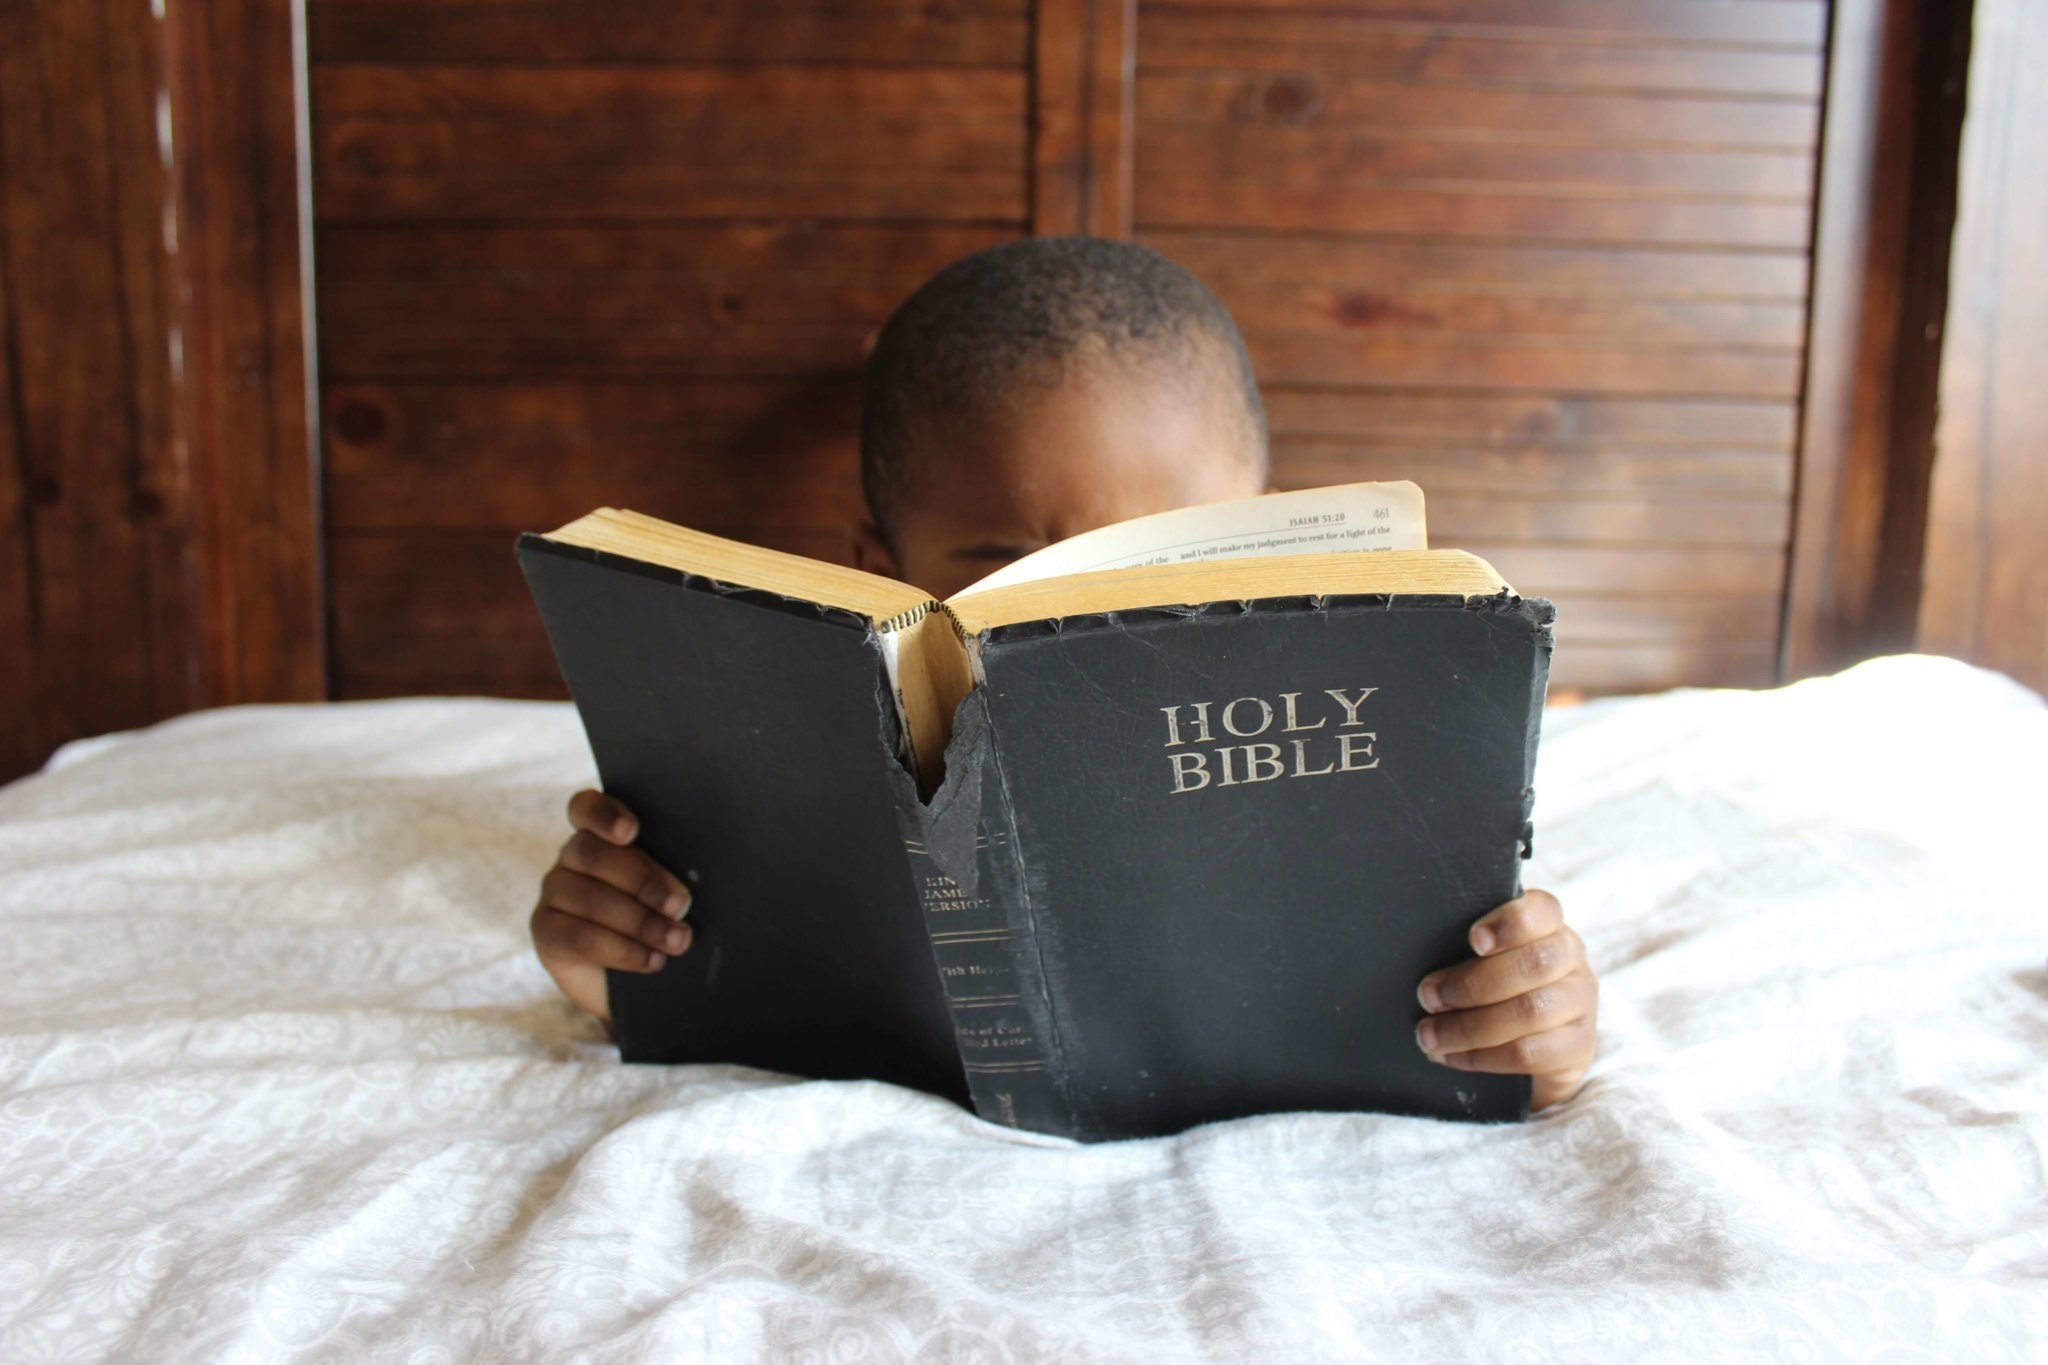 A picture of a young child reading the bible. learn how to reduce social media use and replace with bible reading.